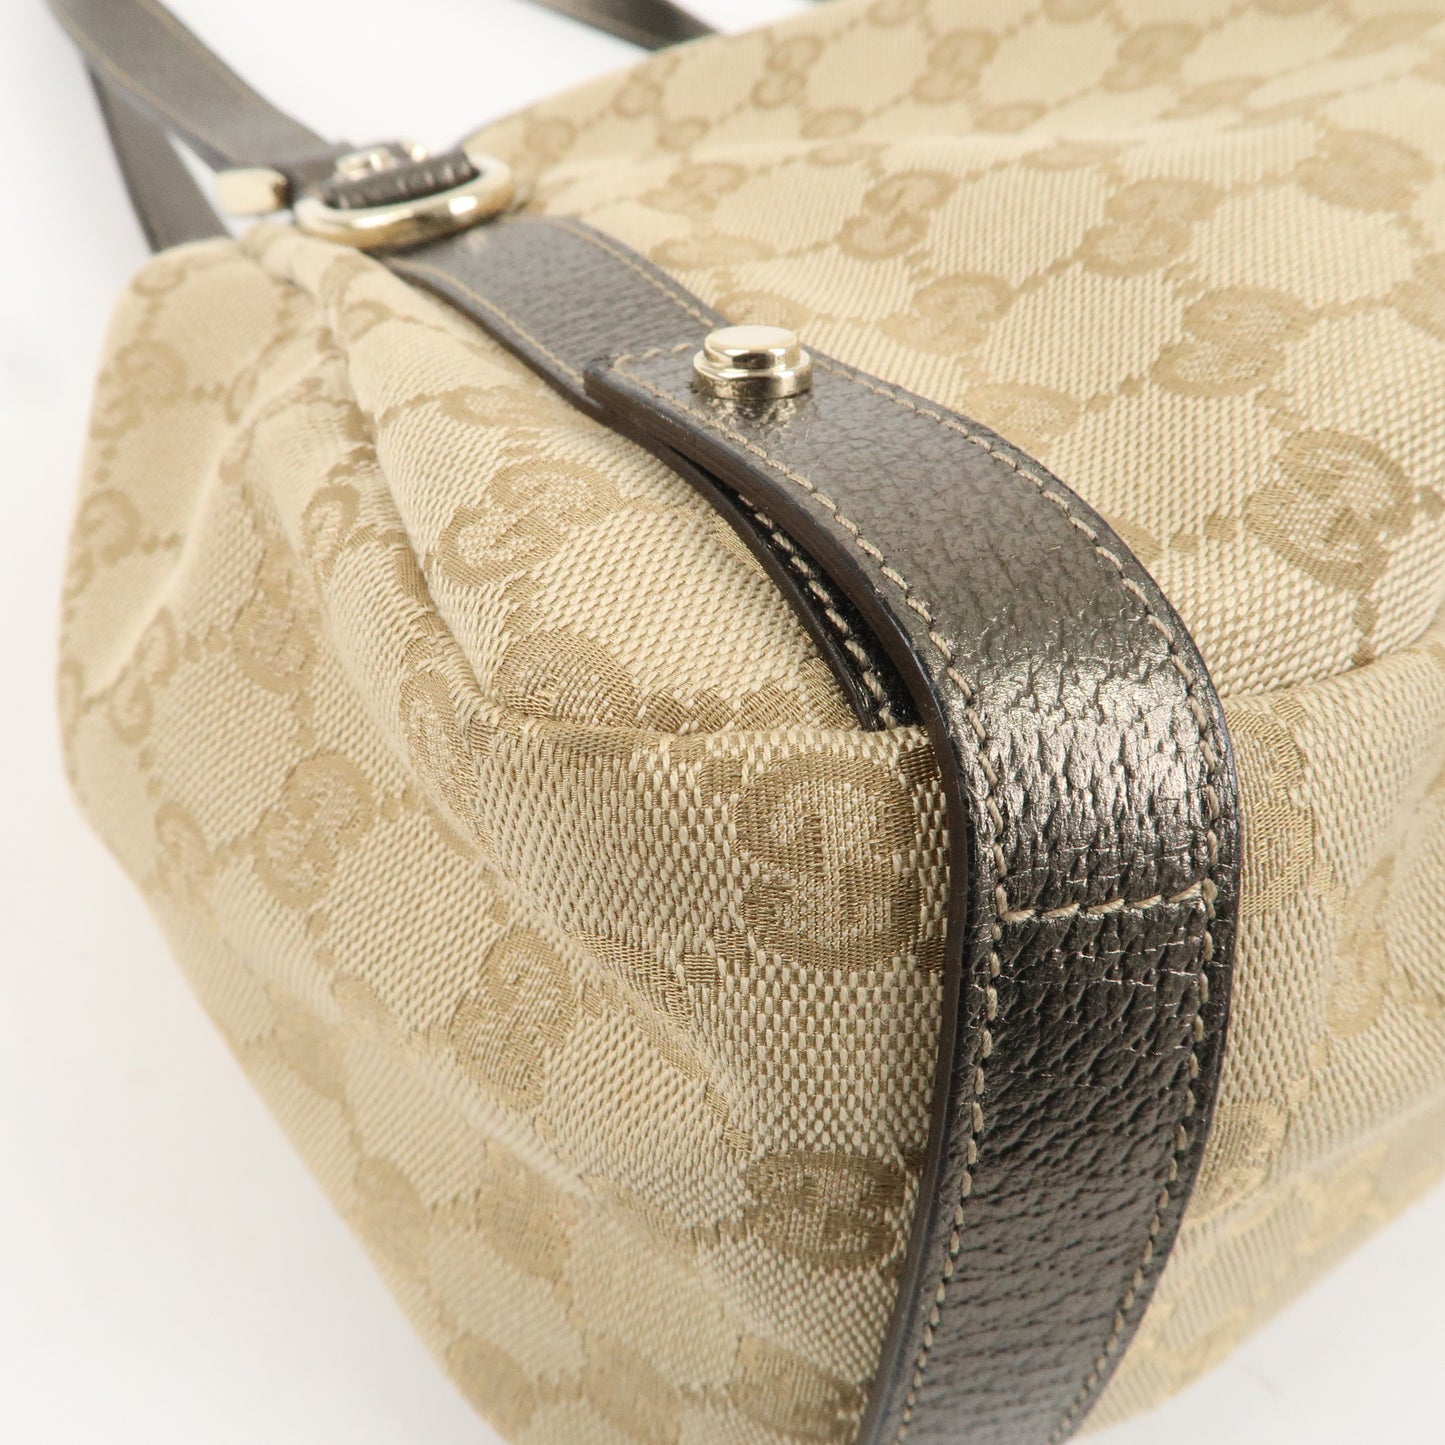 GUCCI Abbey GG Canvas Leather Tote Hand Bag Beige 130736